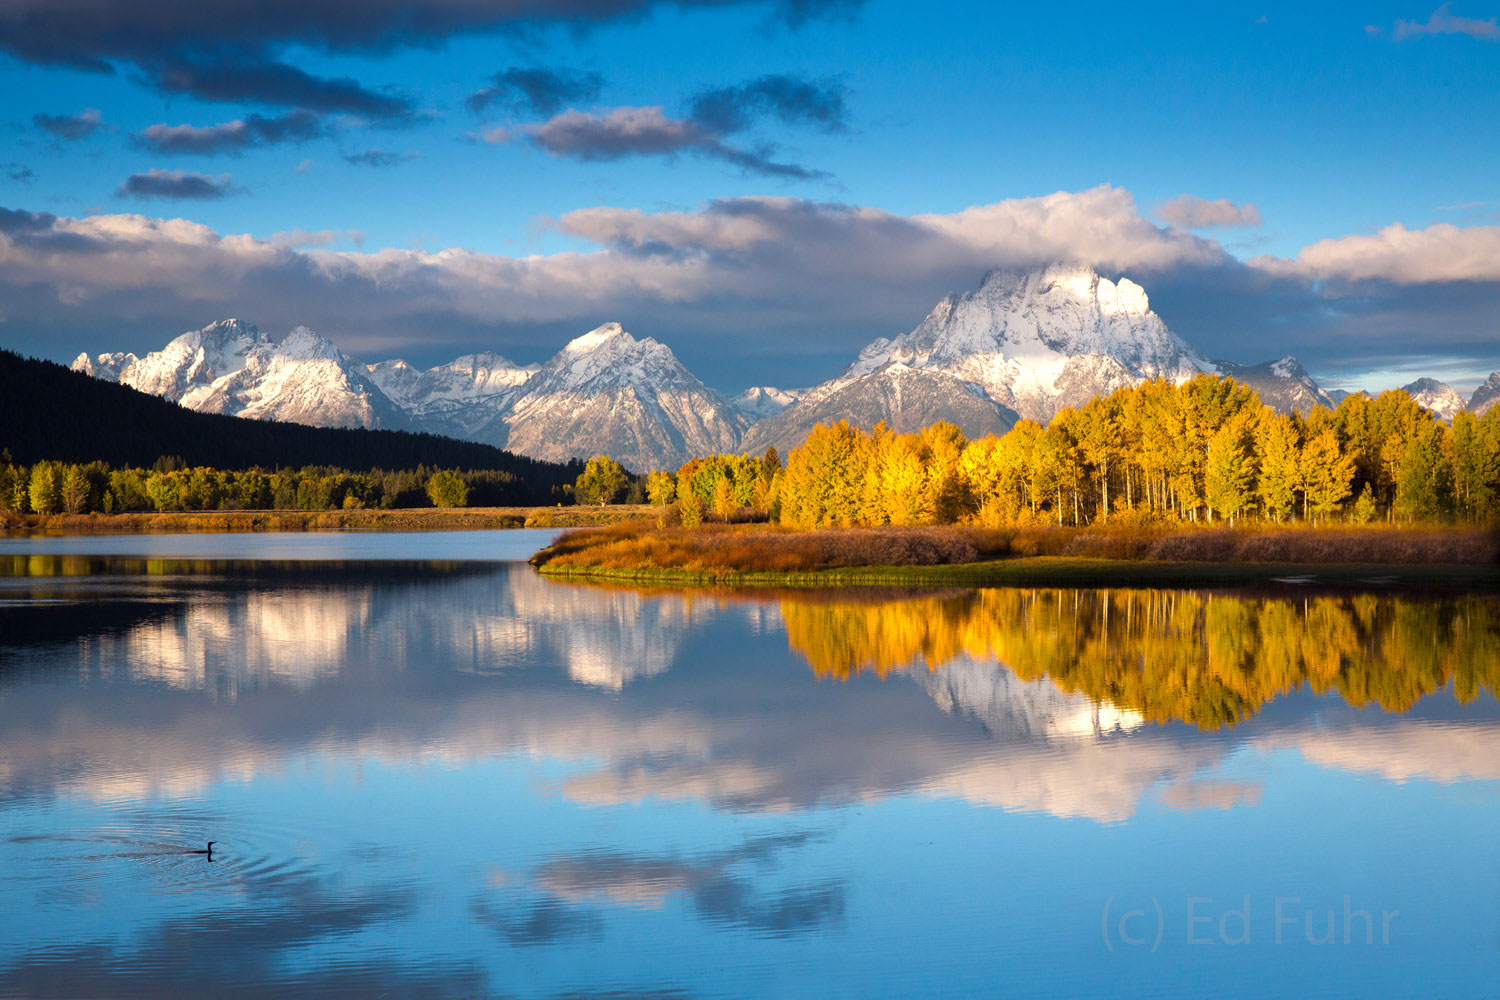 Hundreds of photographers captured a few final images of God's perfection, fresh snow and aspen's finest at Oxbow Bend, before...